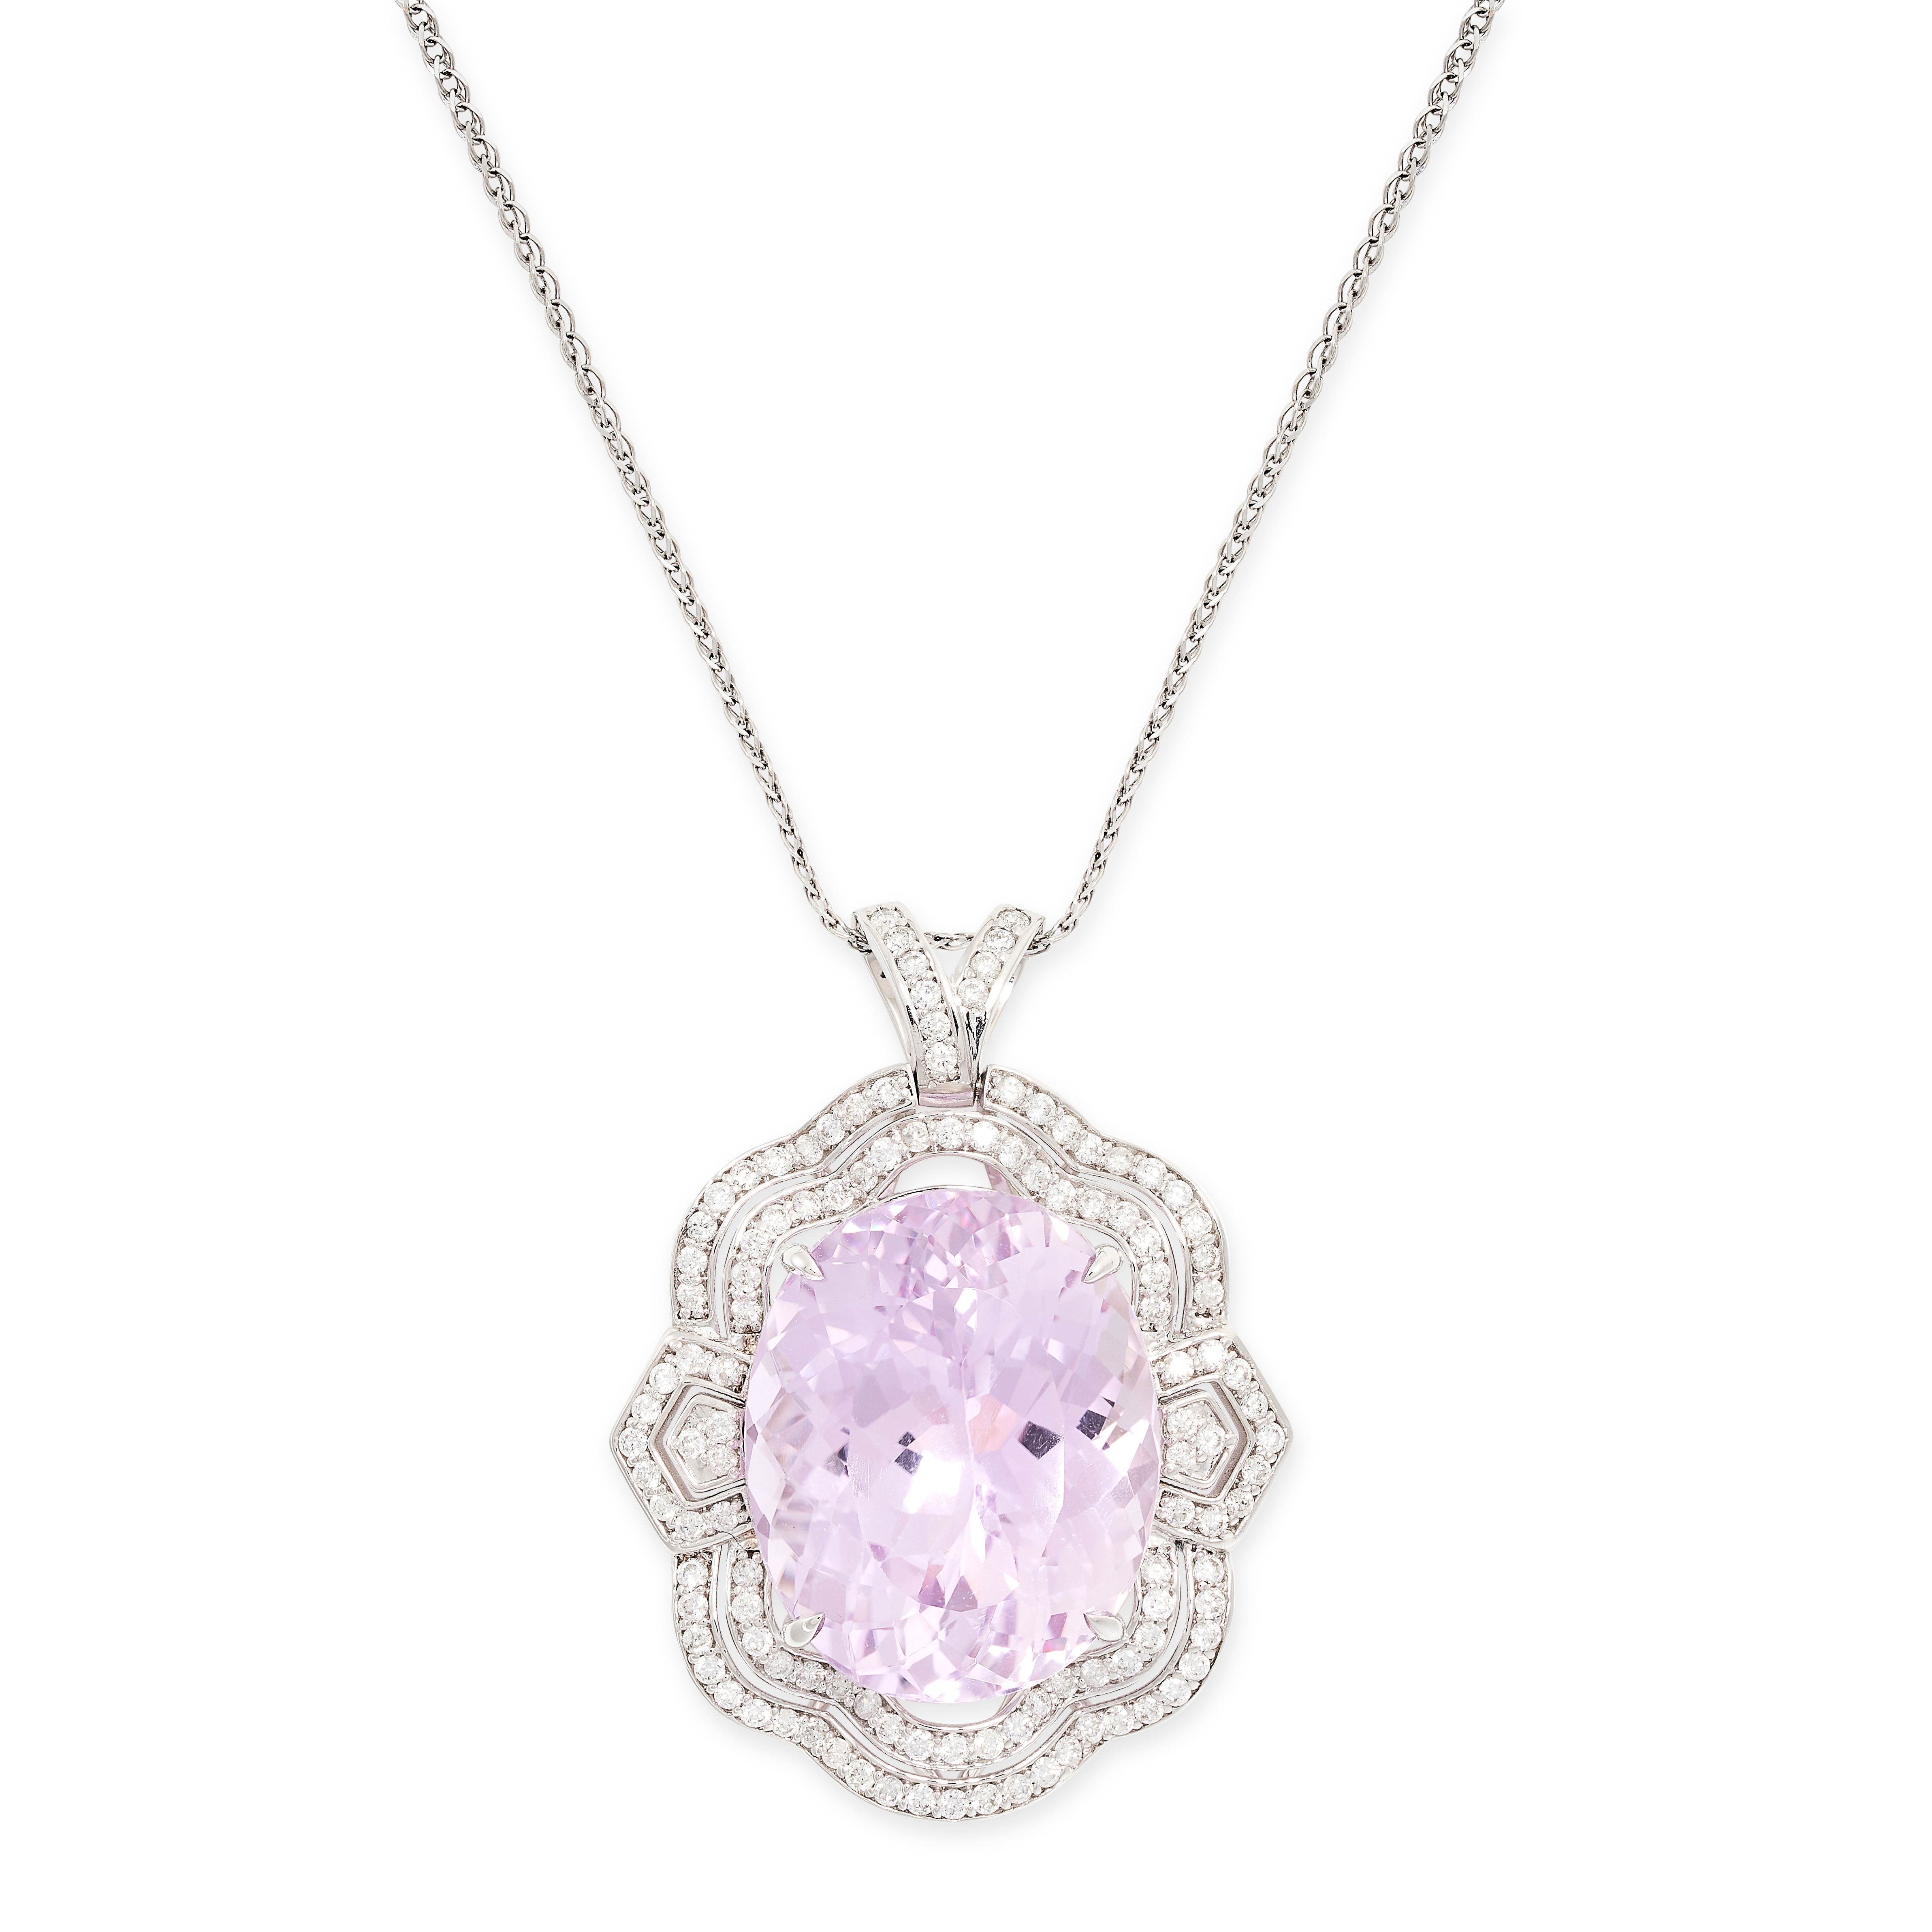 A KUNZITE AND DIAMOND PENDANT in 18ct white gold, set with an oval cut pink kunzite of 23.83